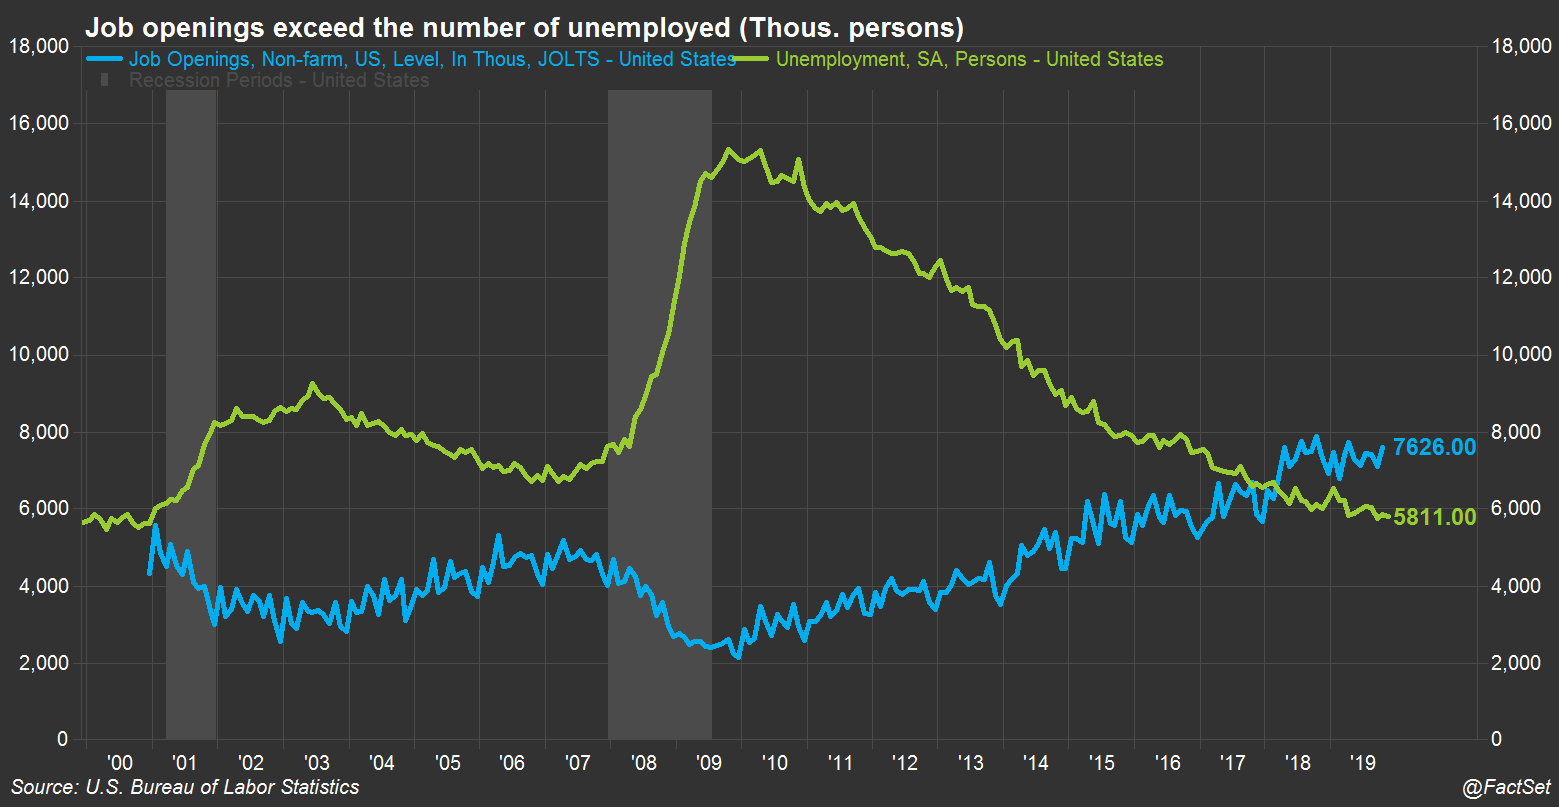 Job openings exceed the number of unemployed